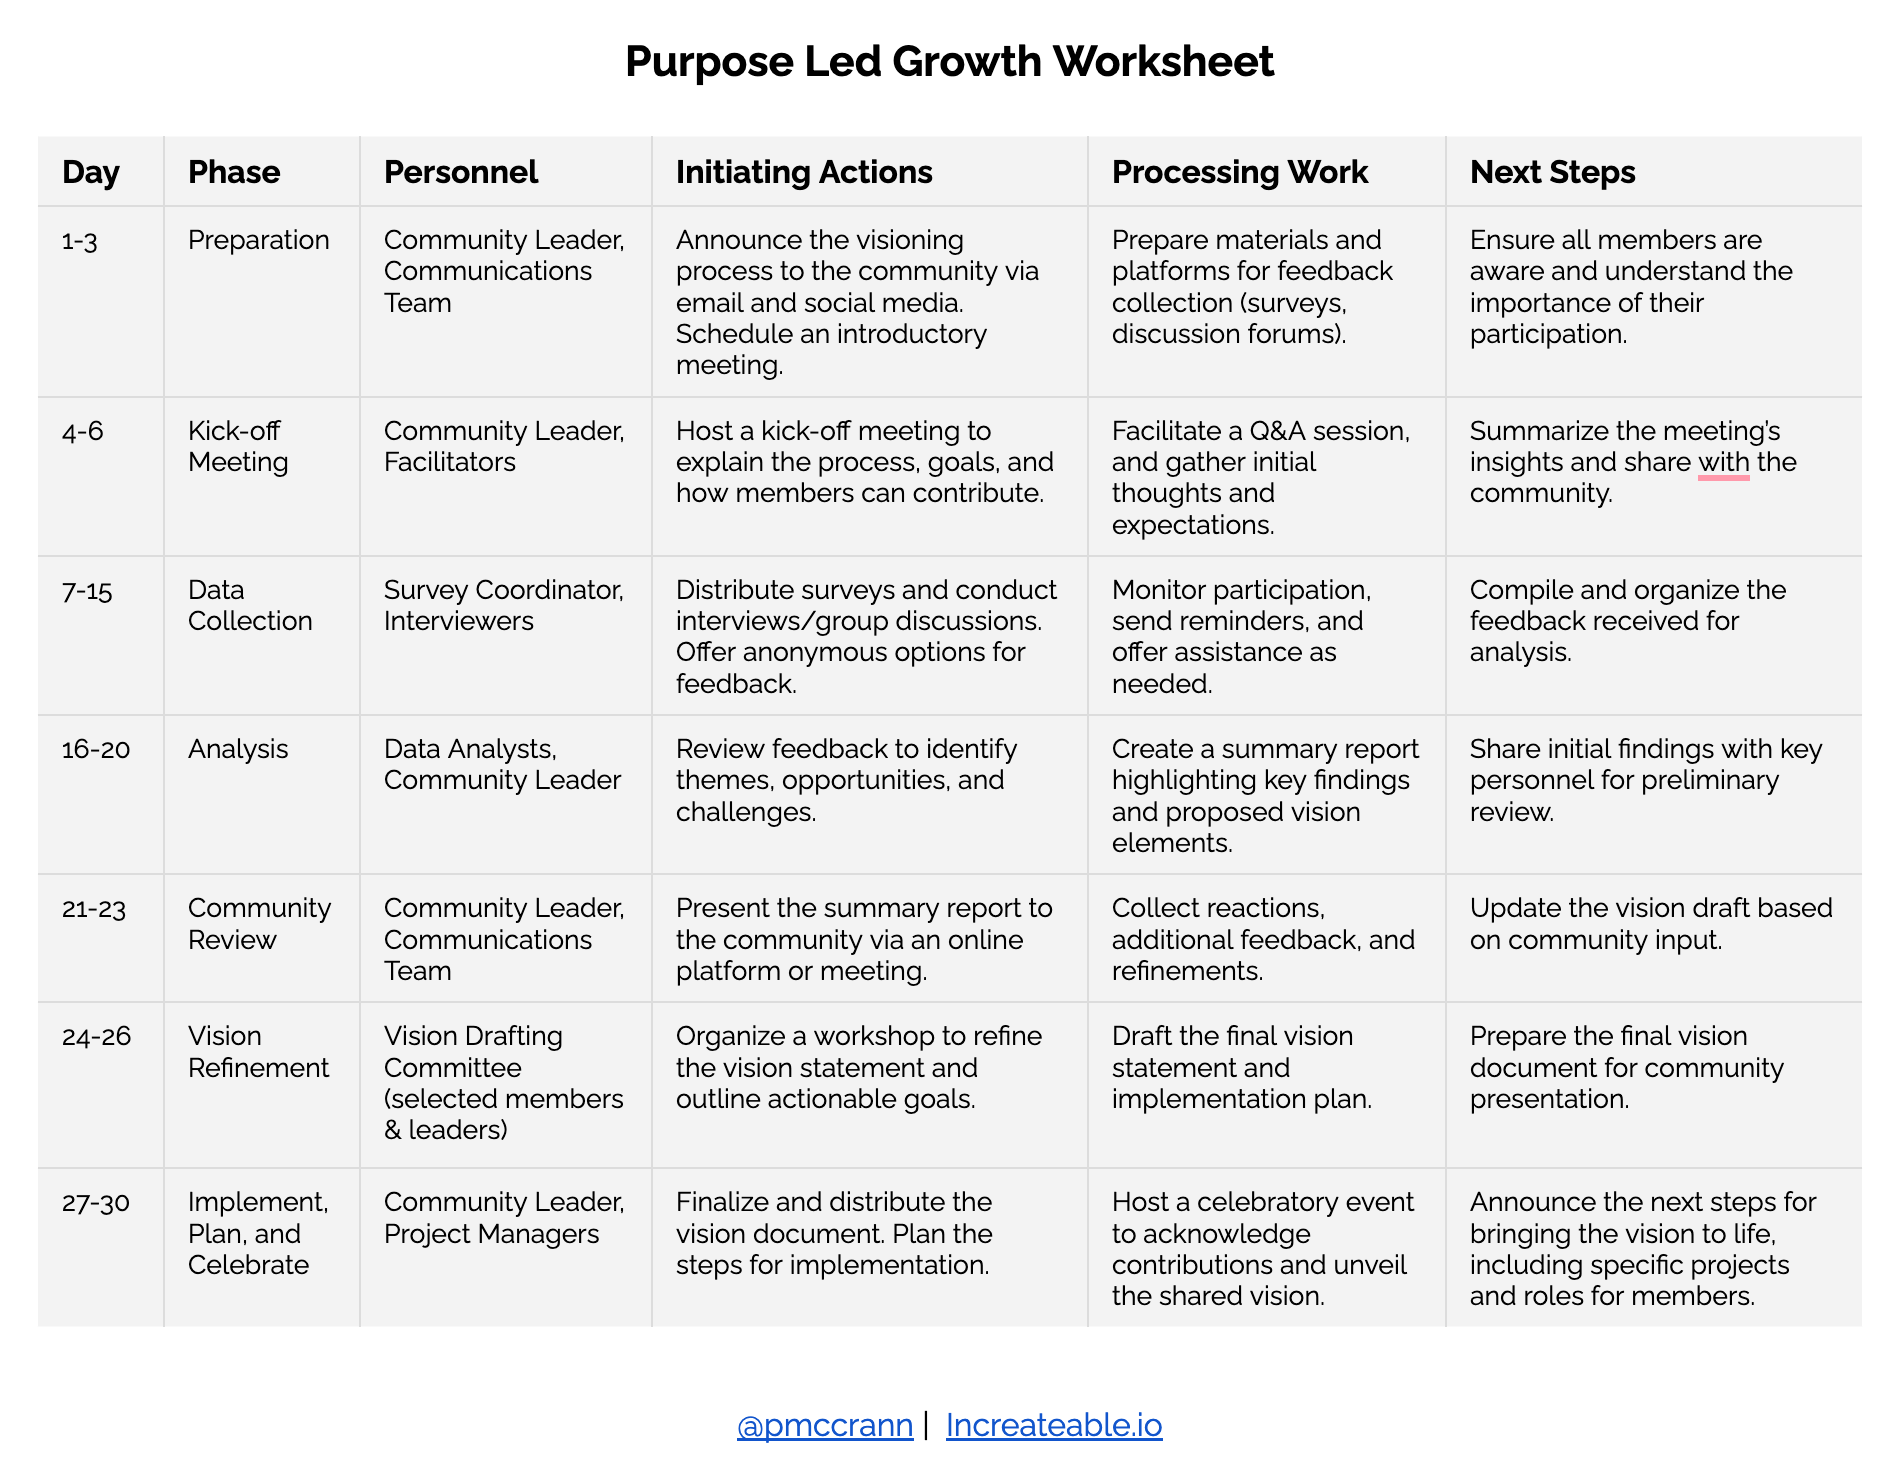 Worksheet Image for Completing a Purpose Led Growth Initiative